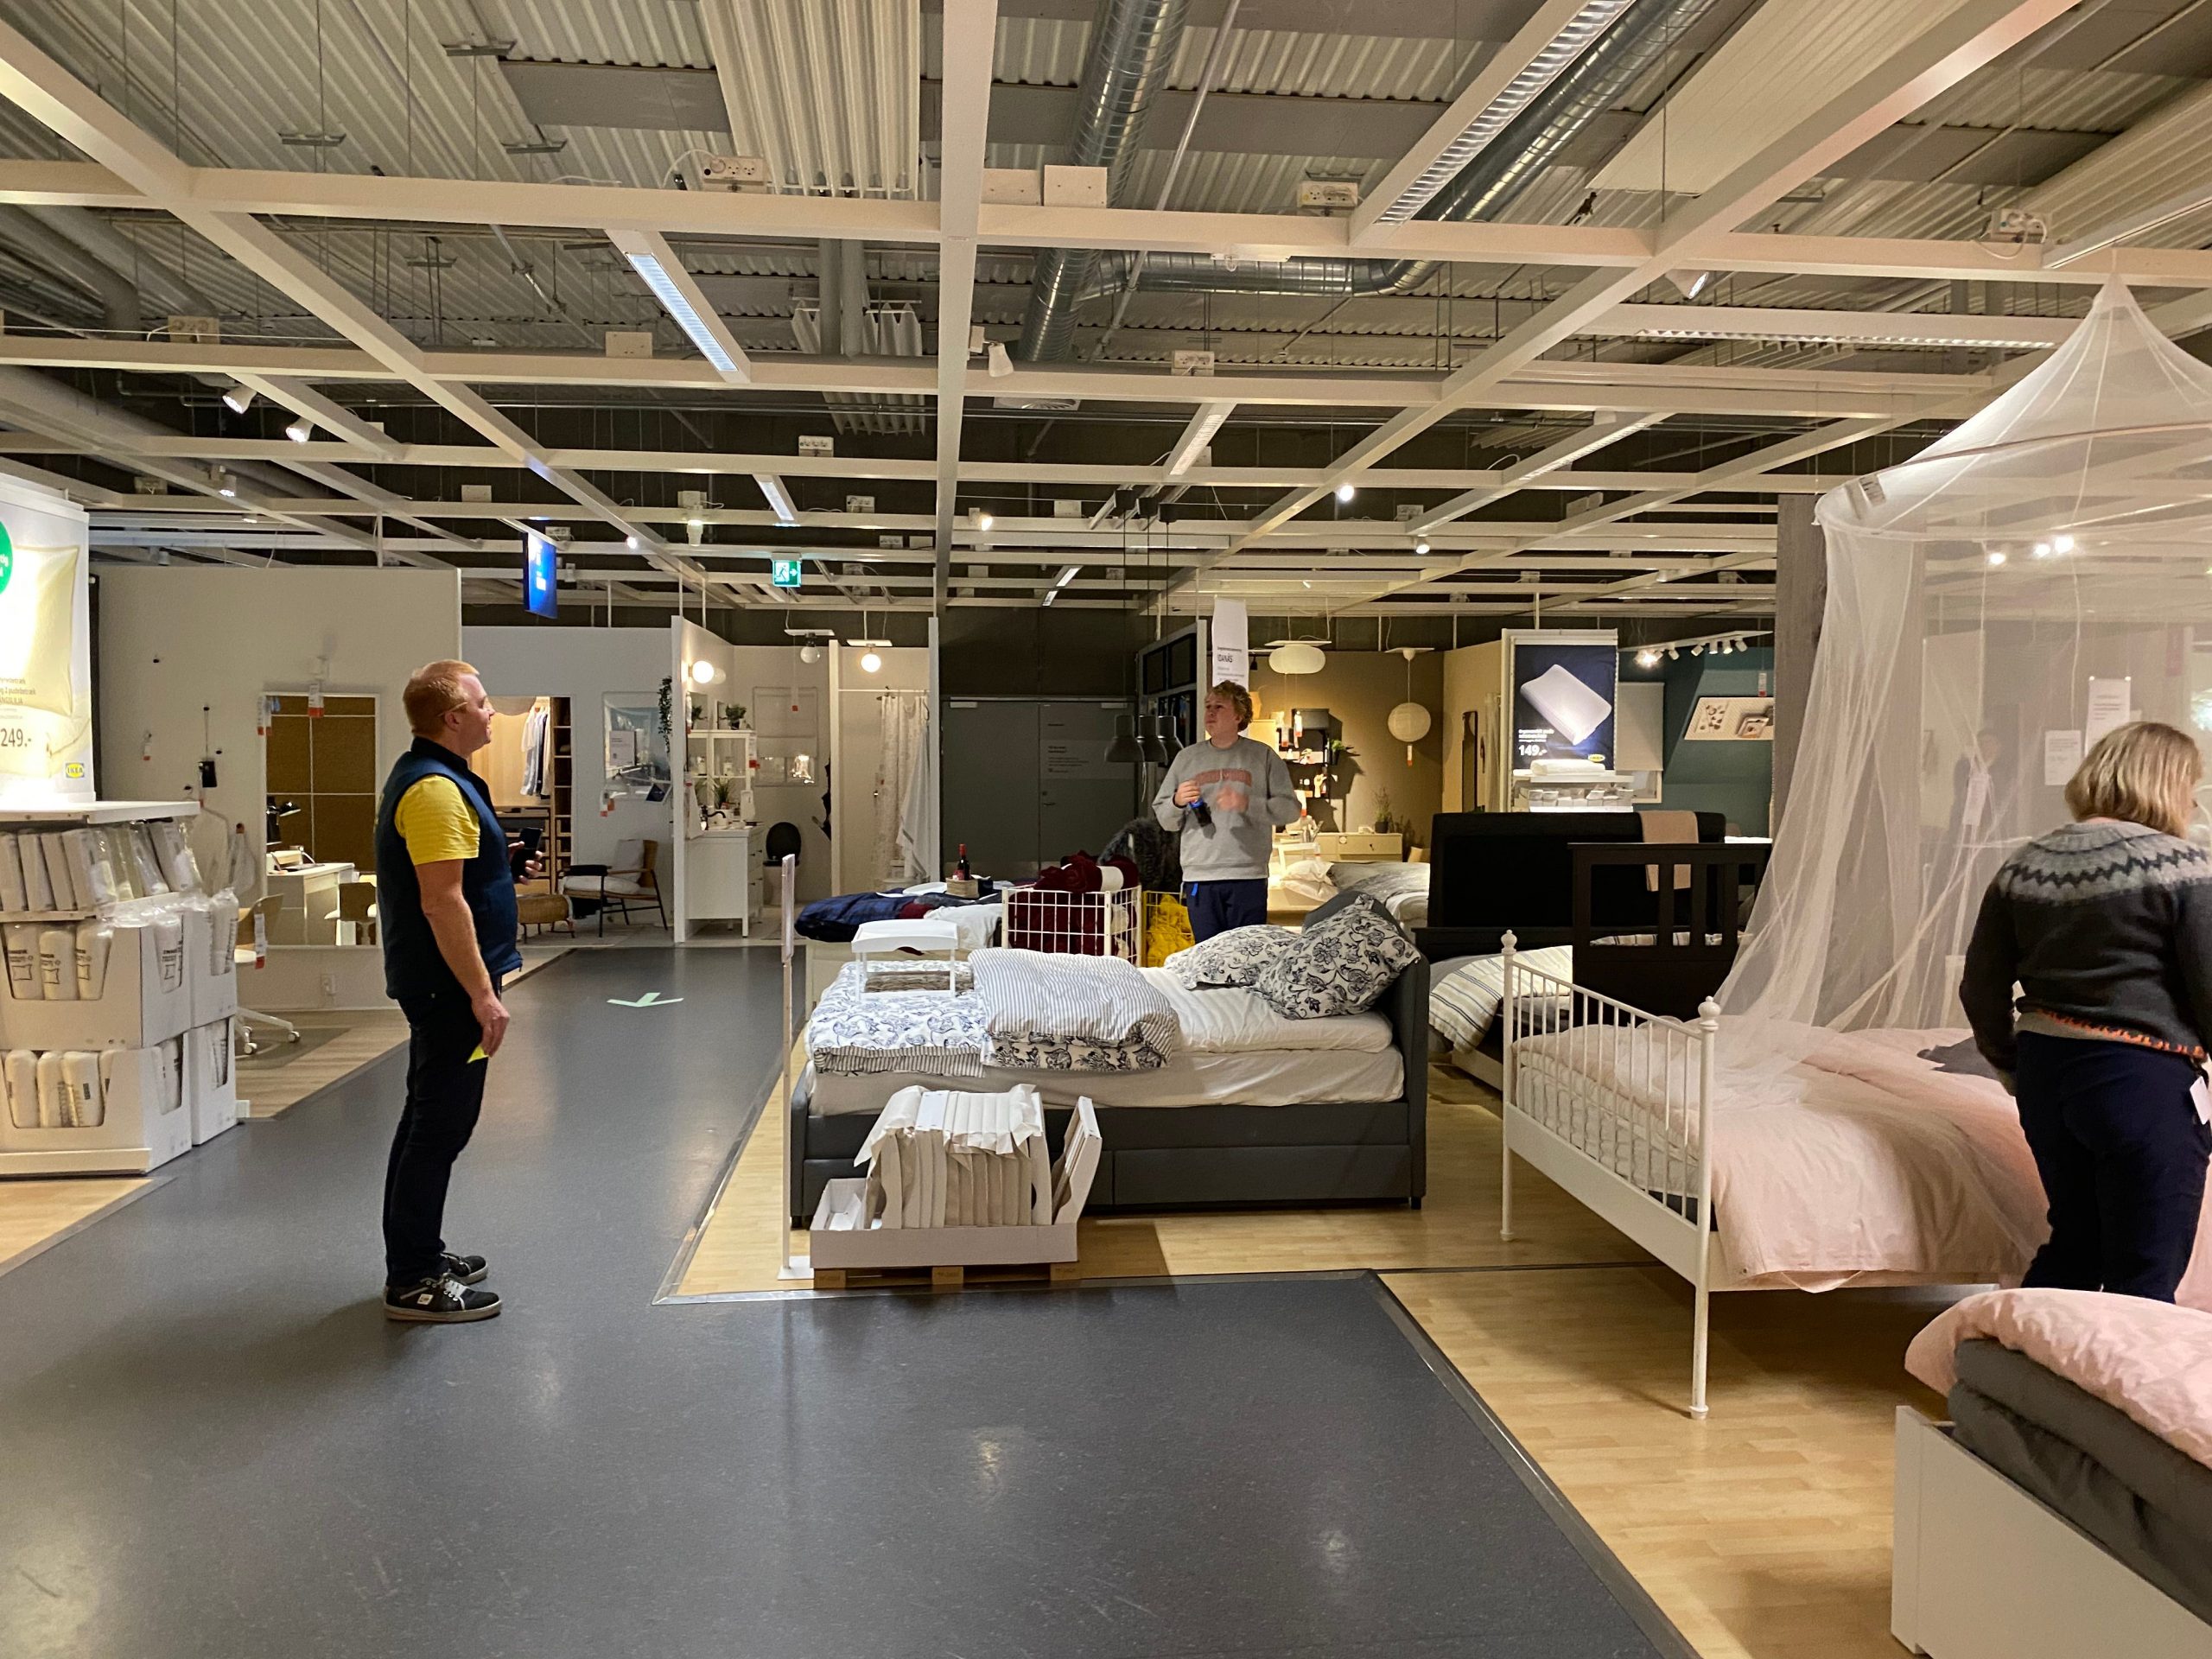 Peter Elmose (L) looks on as customers and employees choose beds to sleep in the IKEA showroom.